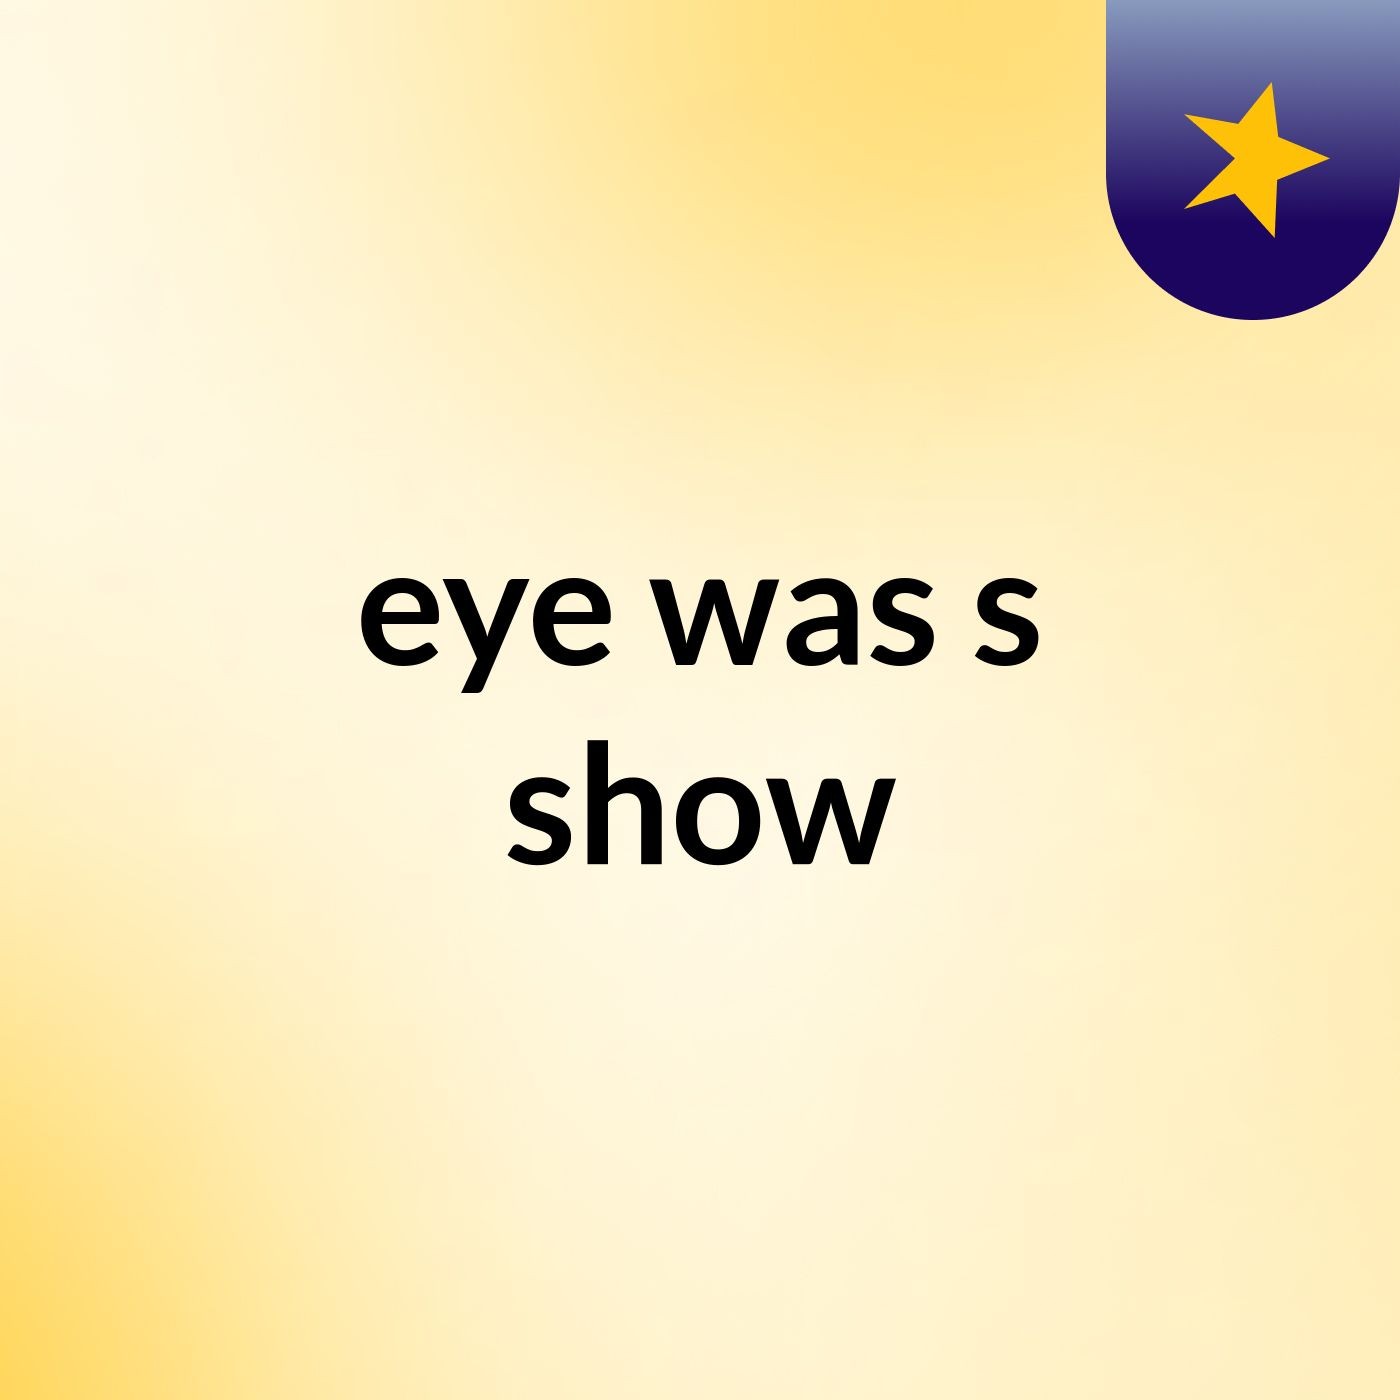 eye was's show